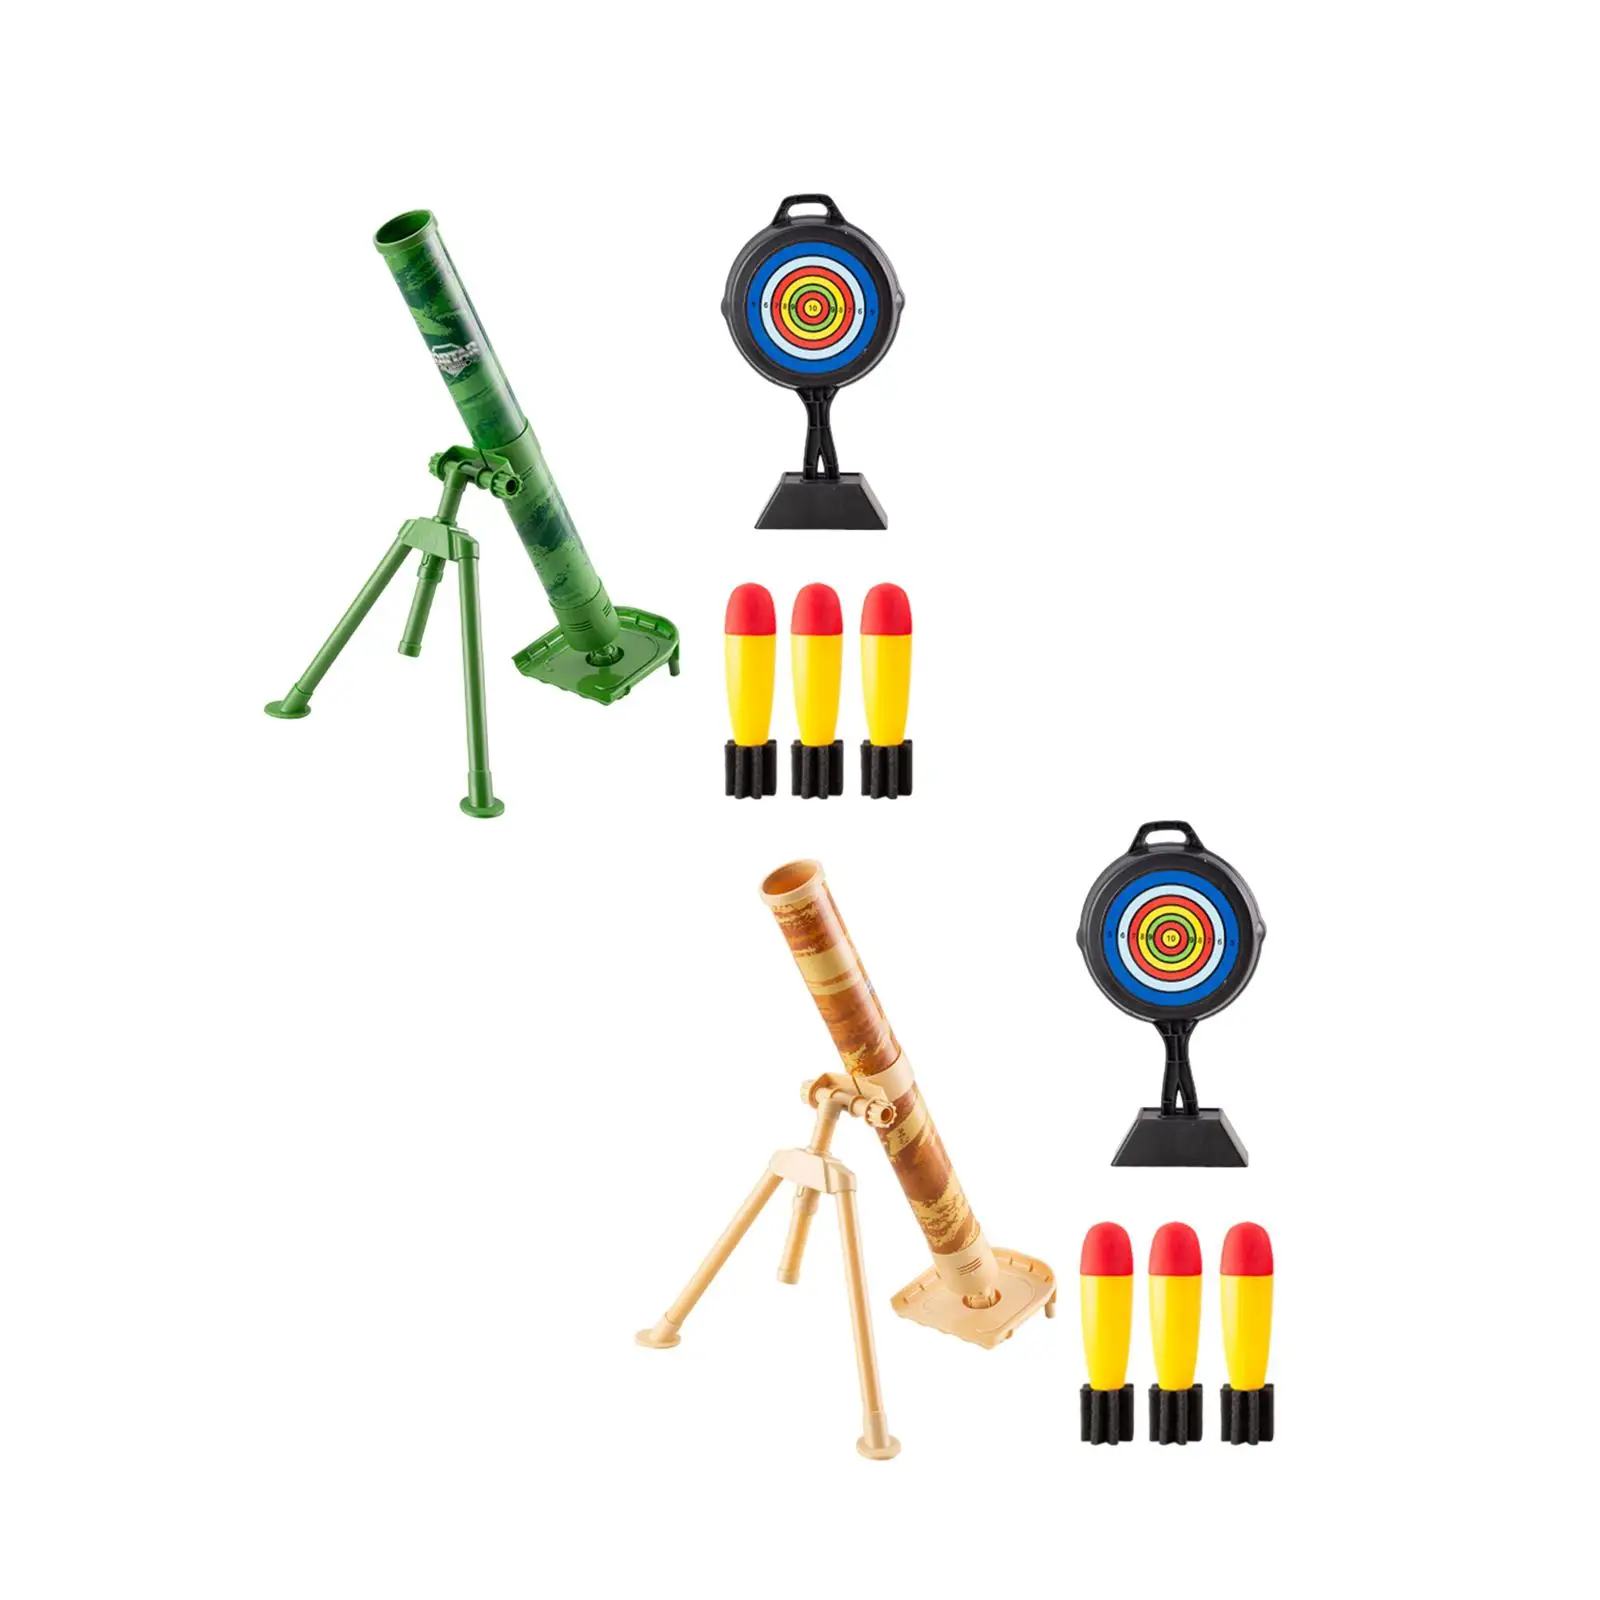 Mortar Launcher Toys Game for Kids Boys and Girls Festival Gifts